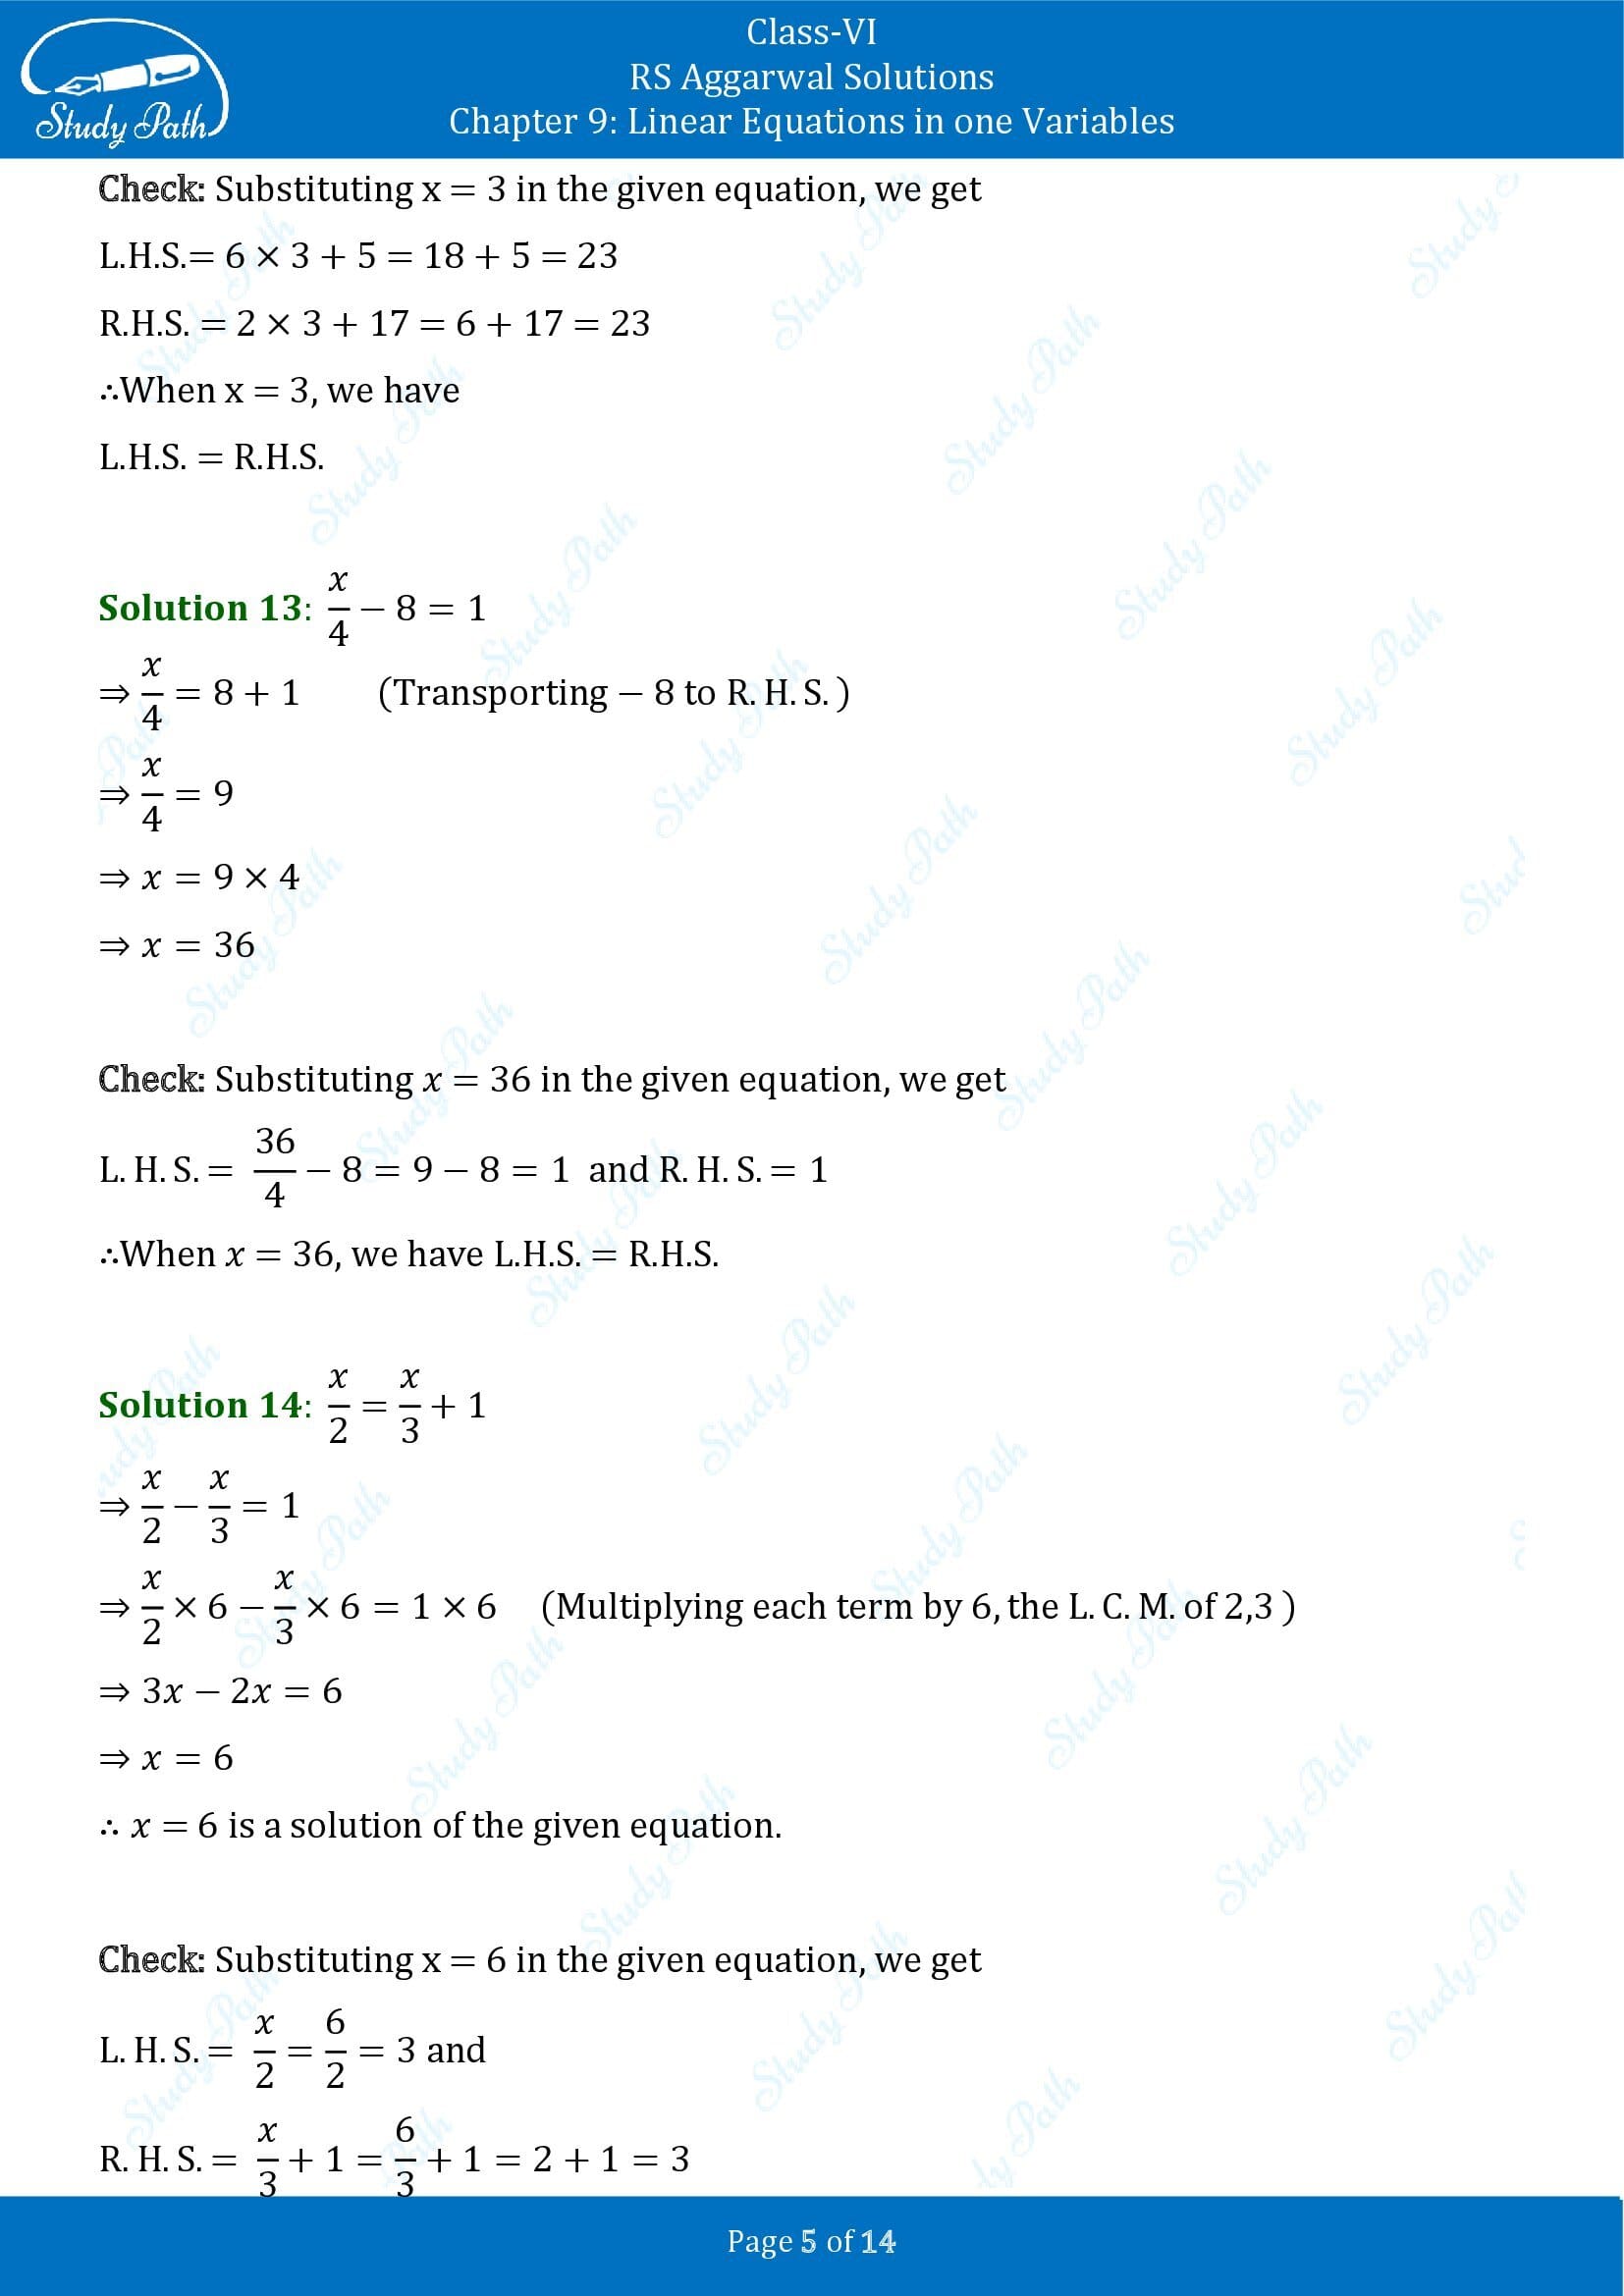 RS Aggarwal Solutions Class 6 Chapter 9 Linear Equations in One Variable Exercise 9B 00005